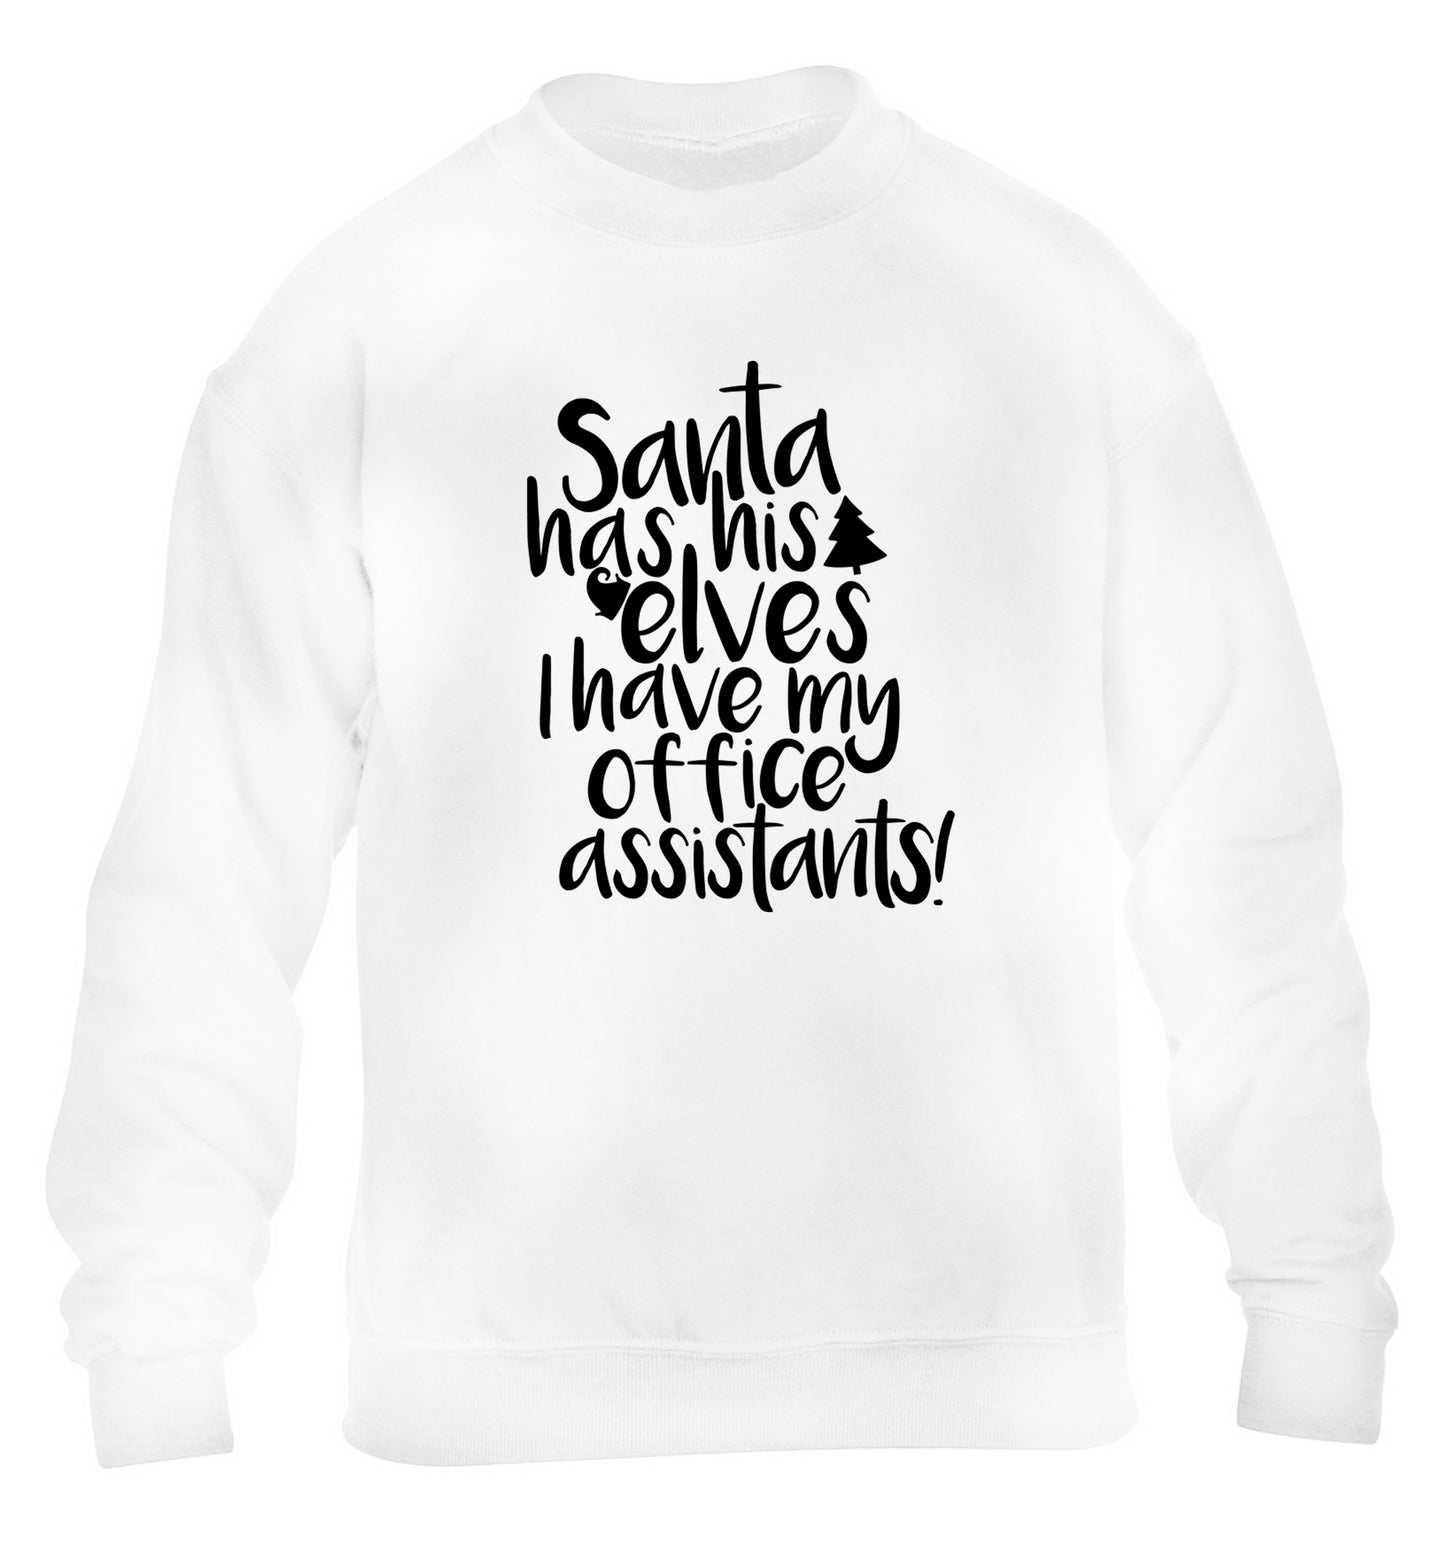 Santa has elves I have office assistants children's white sweater 12-13 Years